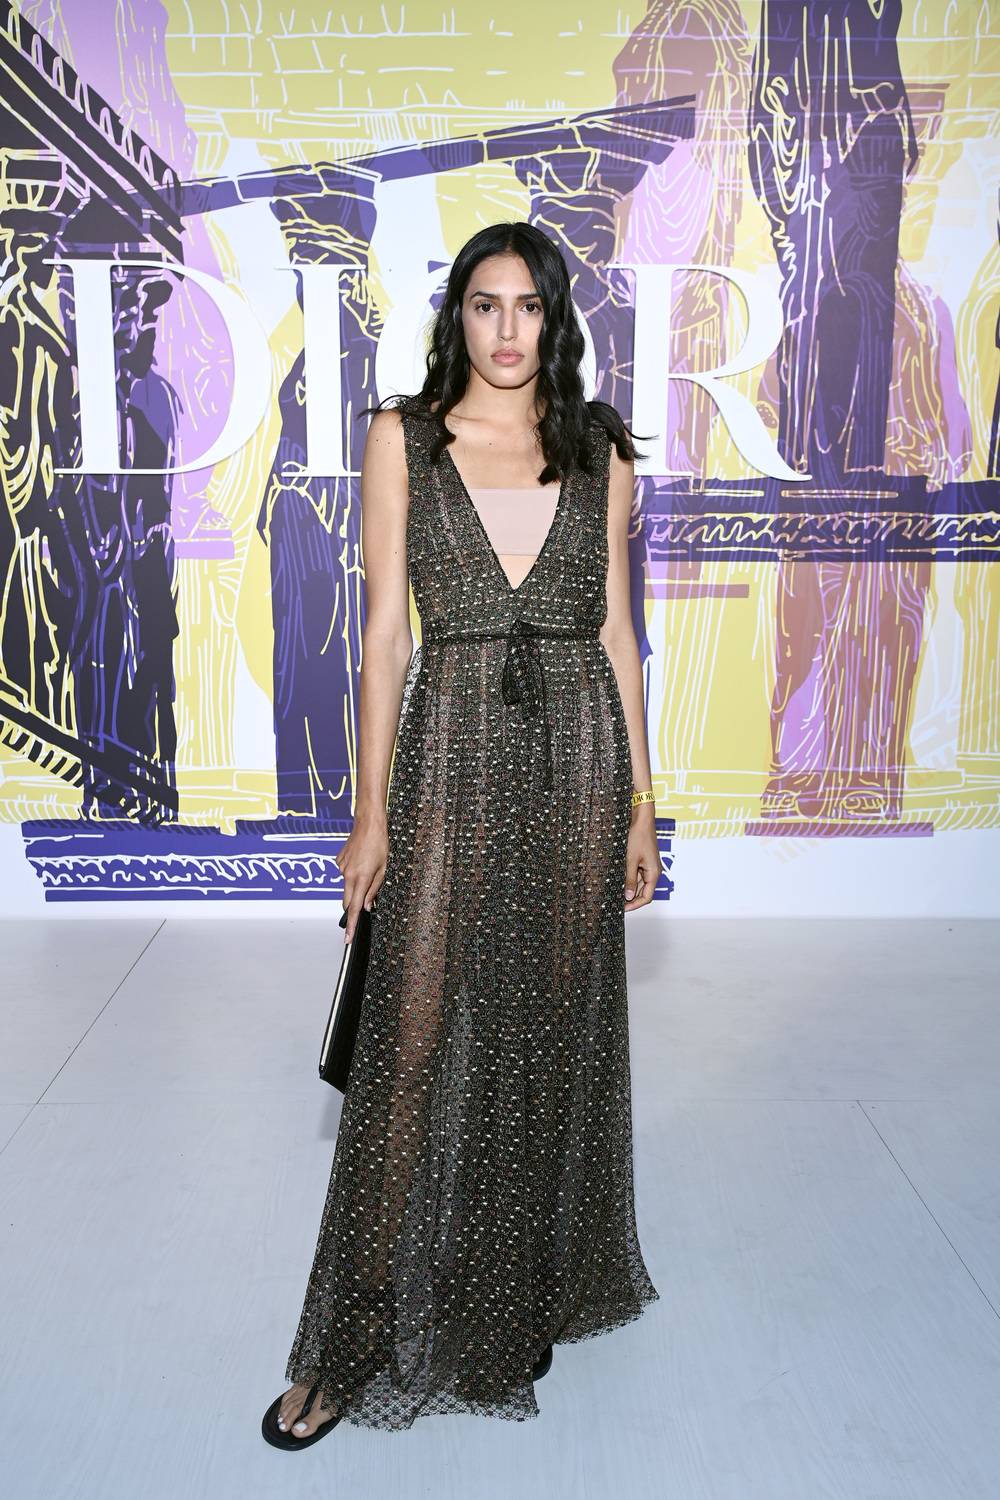 Athina Koini wore a Dior embroidered black tulle dress.